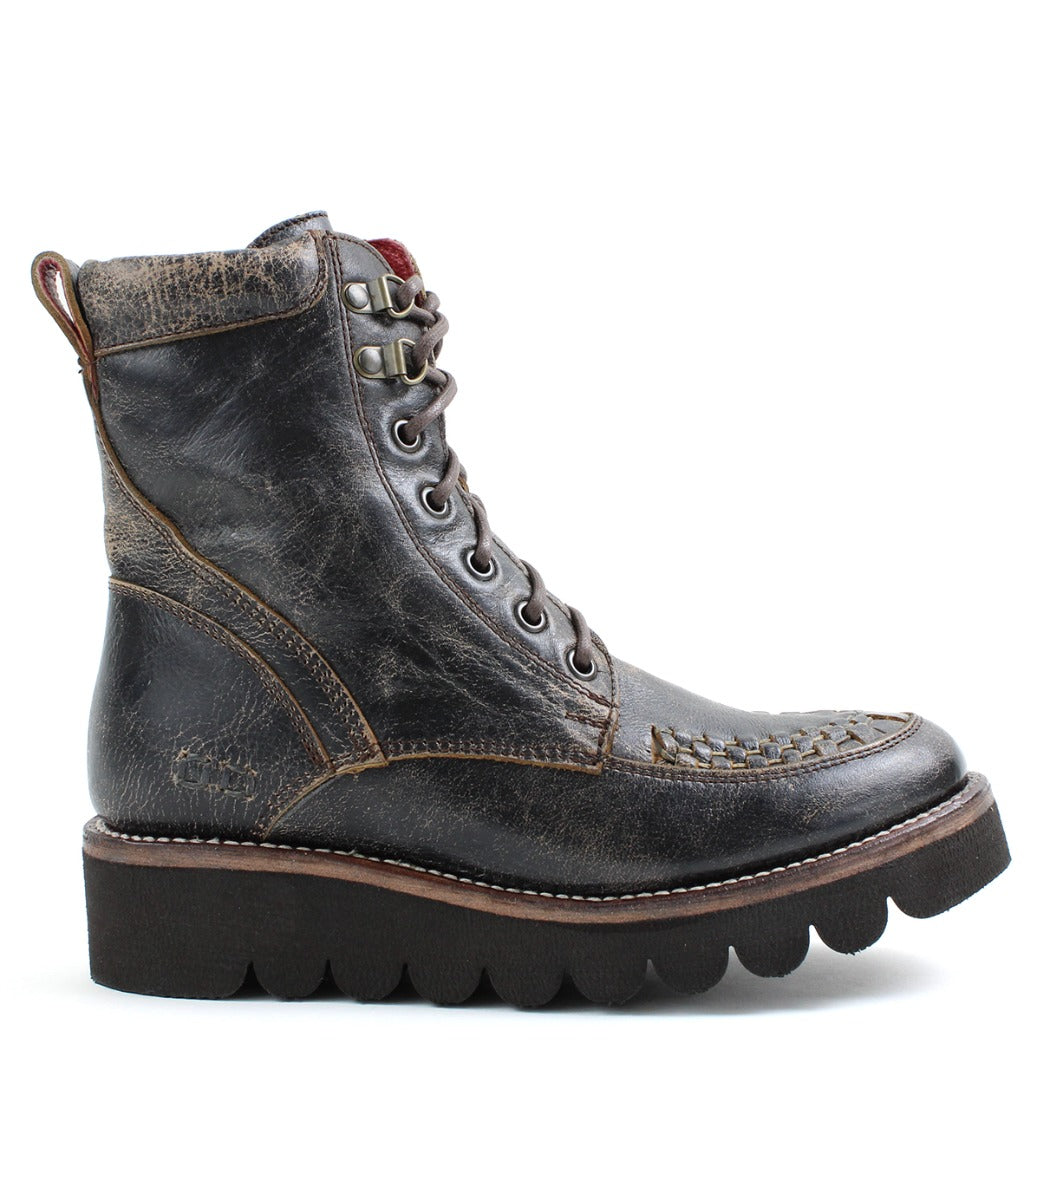 A women's black leather Elisha II boot with lace ups by Bed Stu.